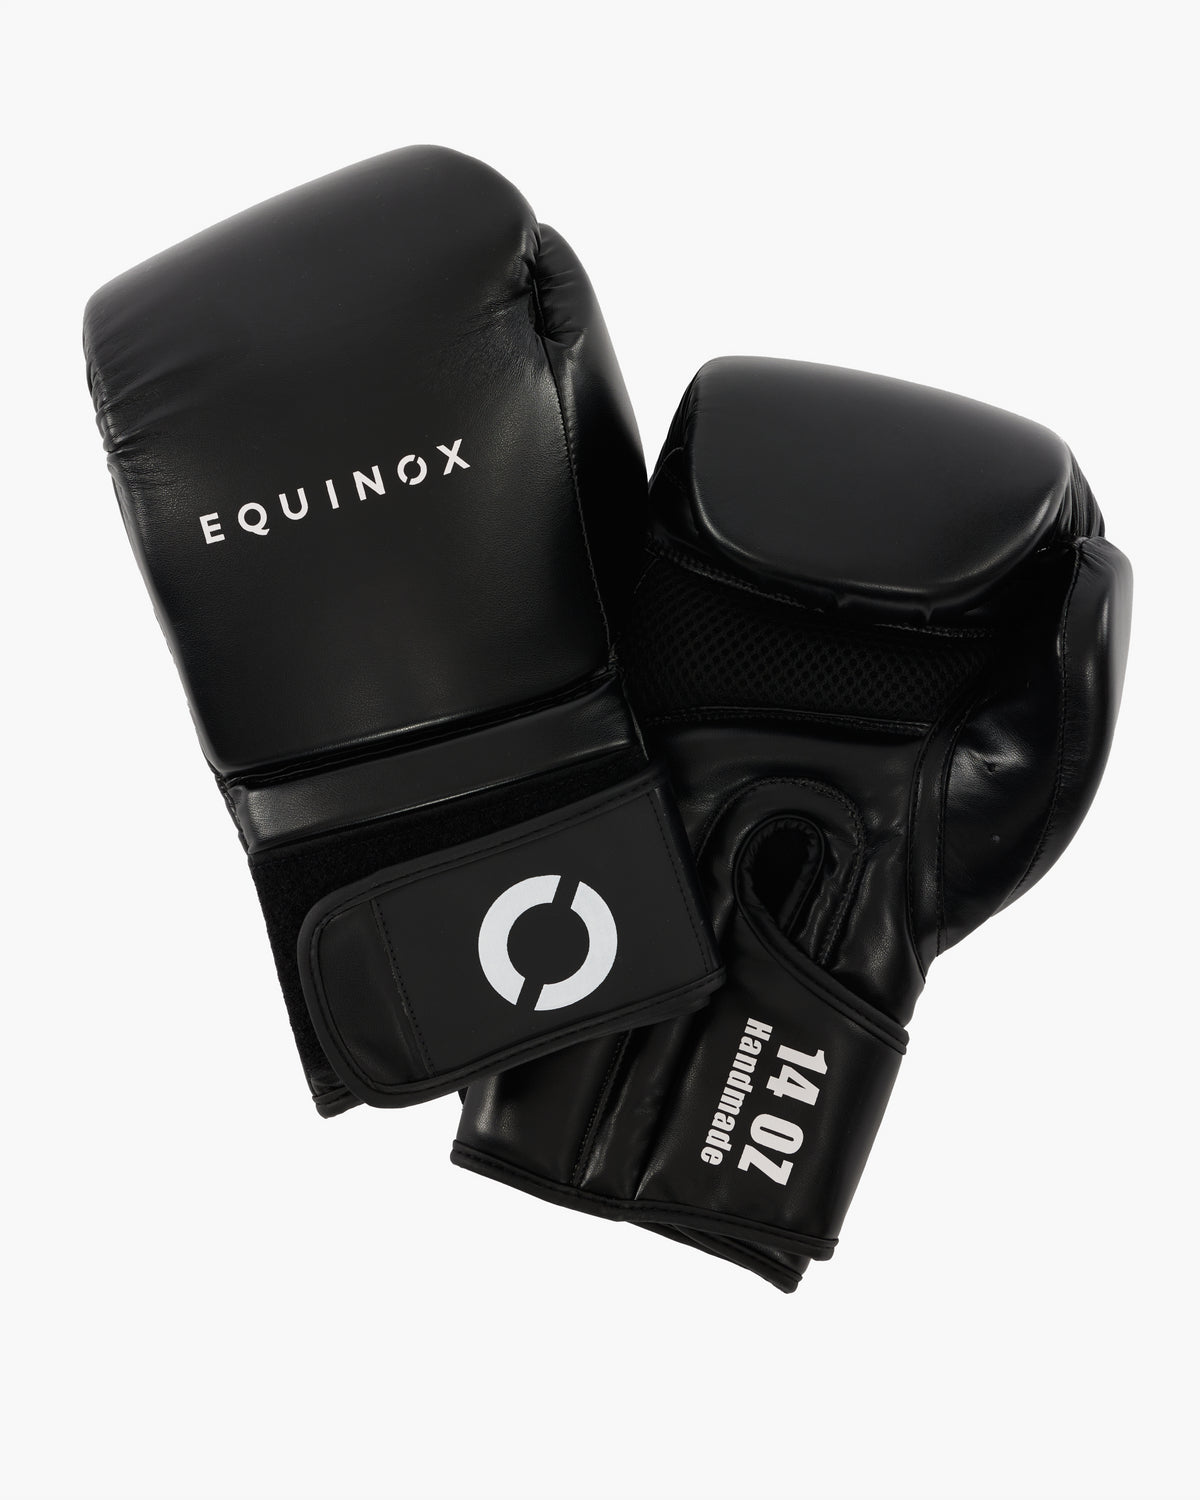 Equinox Valle 3000 Boxing Gloves